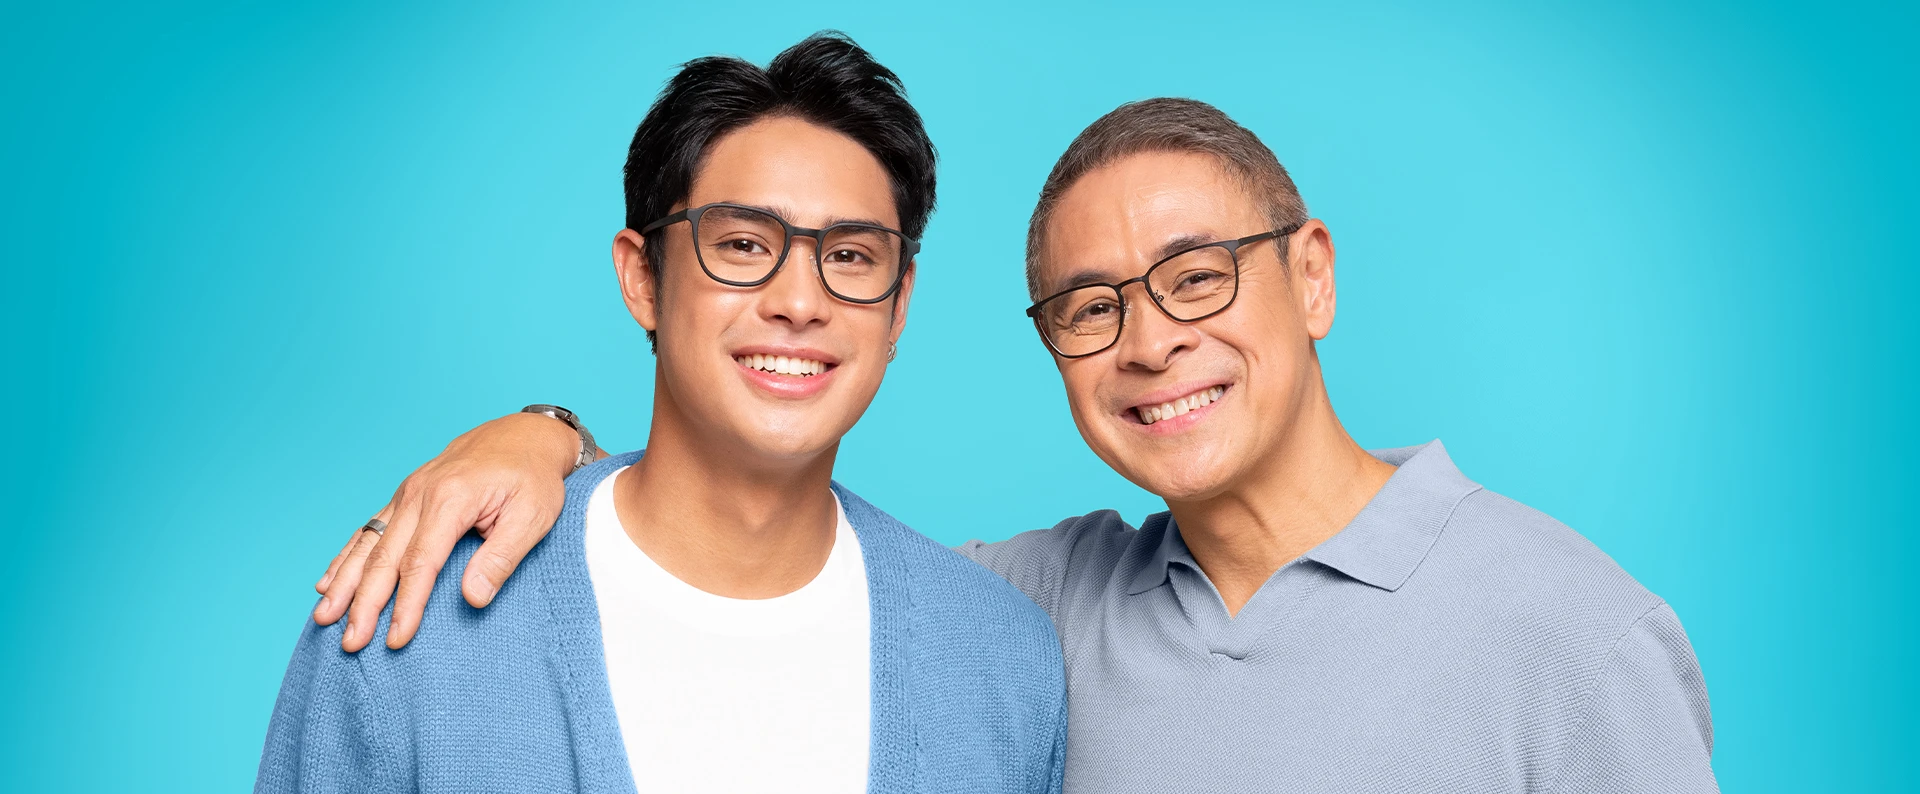 Donny and Anthony Pangilinan - The New Faces of EO